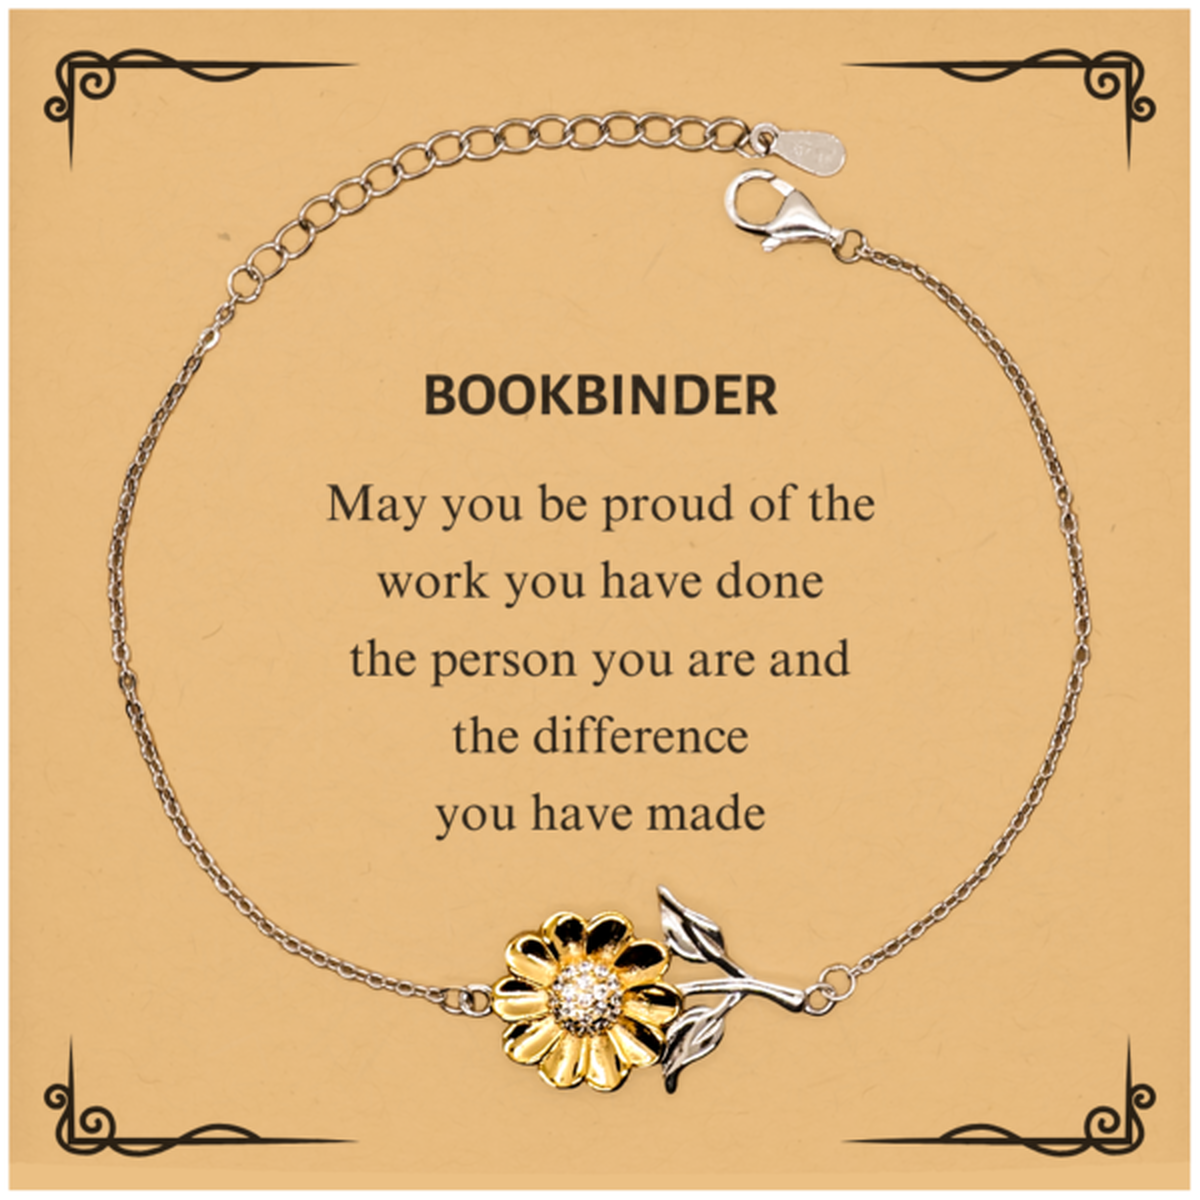 Bookbinder May you be proud of the work you have done, Retirement Bookbinder Sunflower Bracelet for Colleague Appreciation Gifts Amazing for Bookbinder